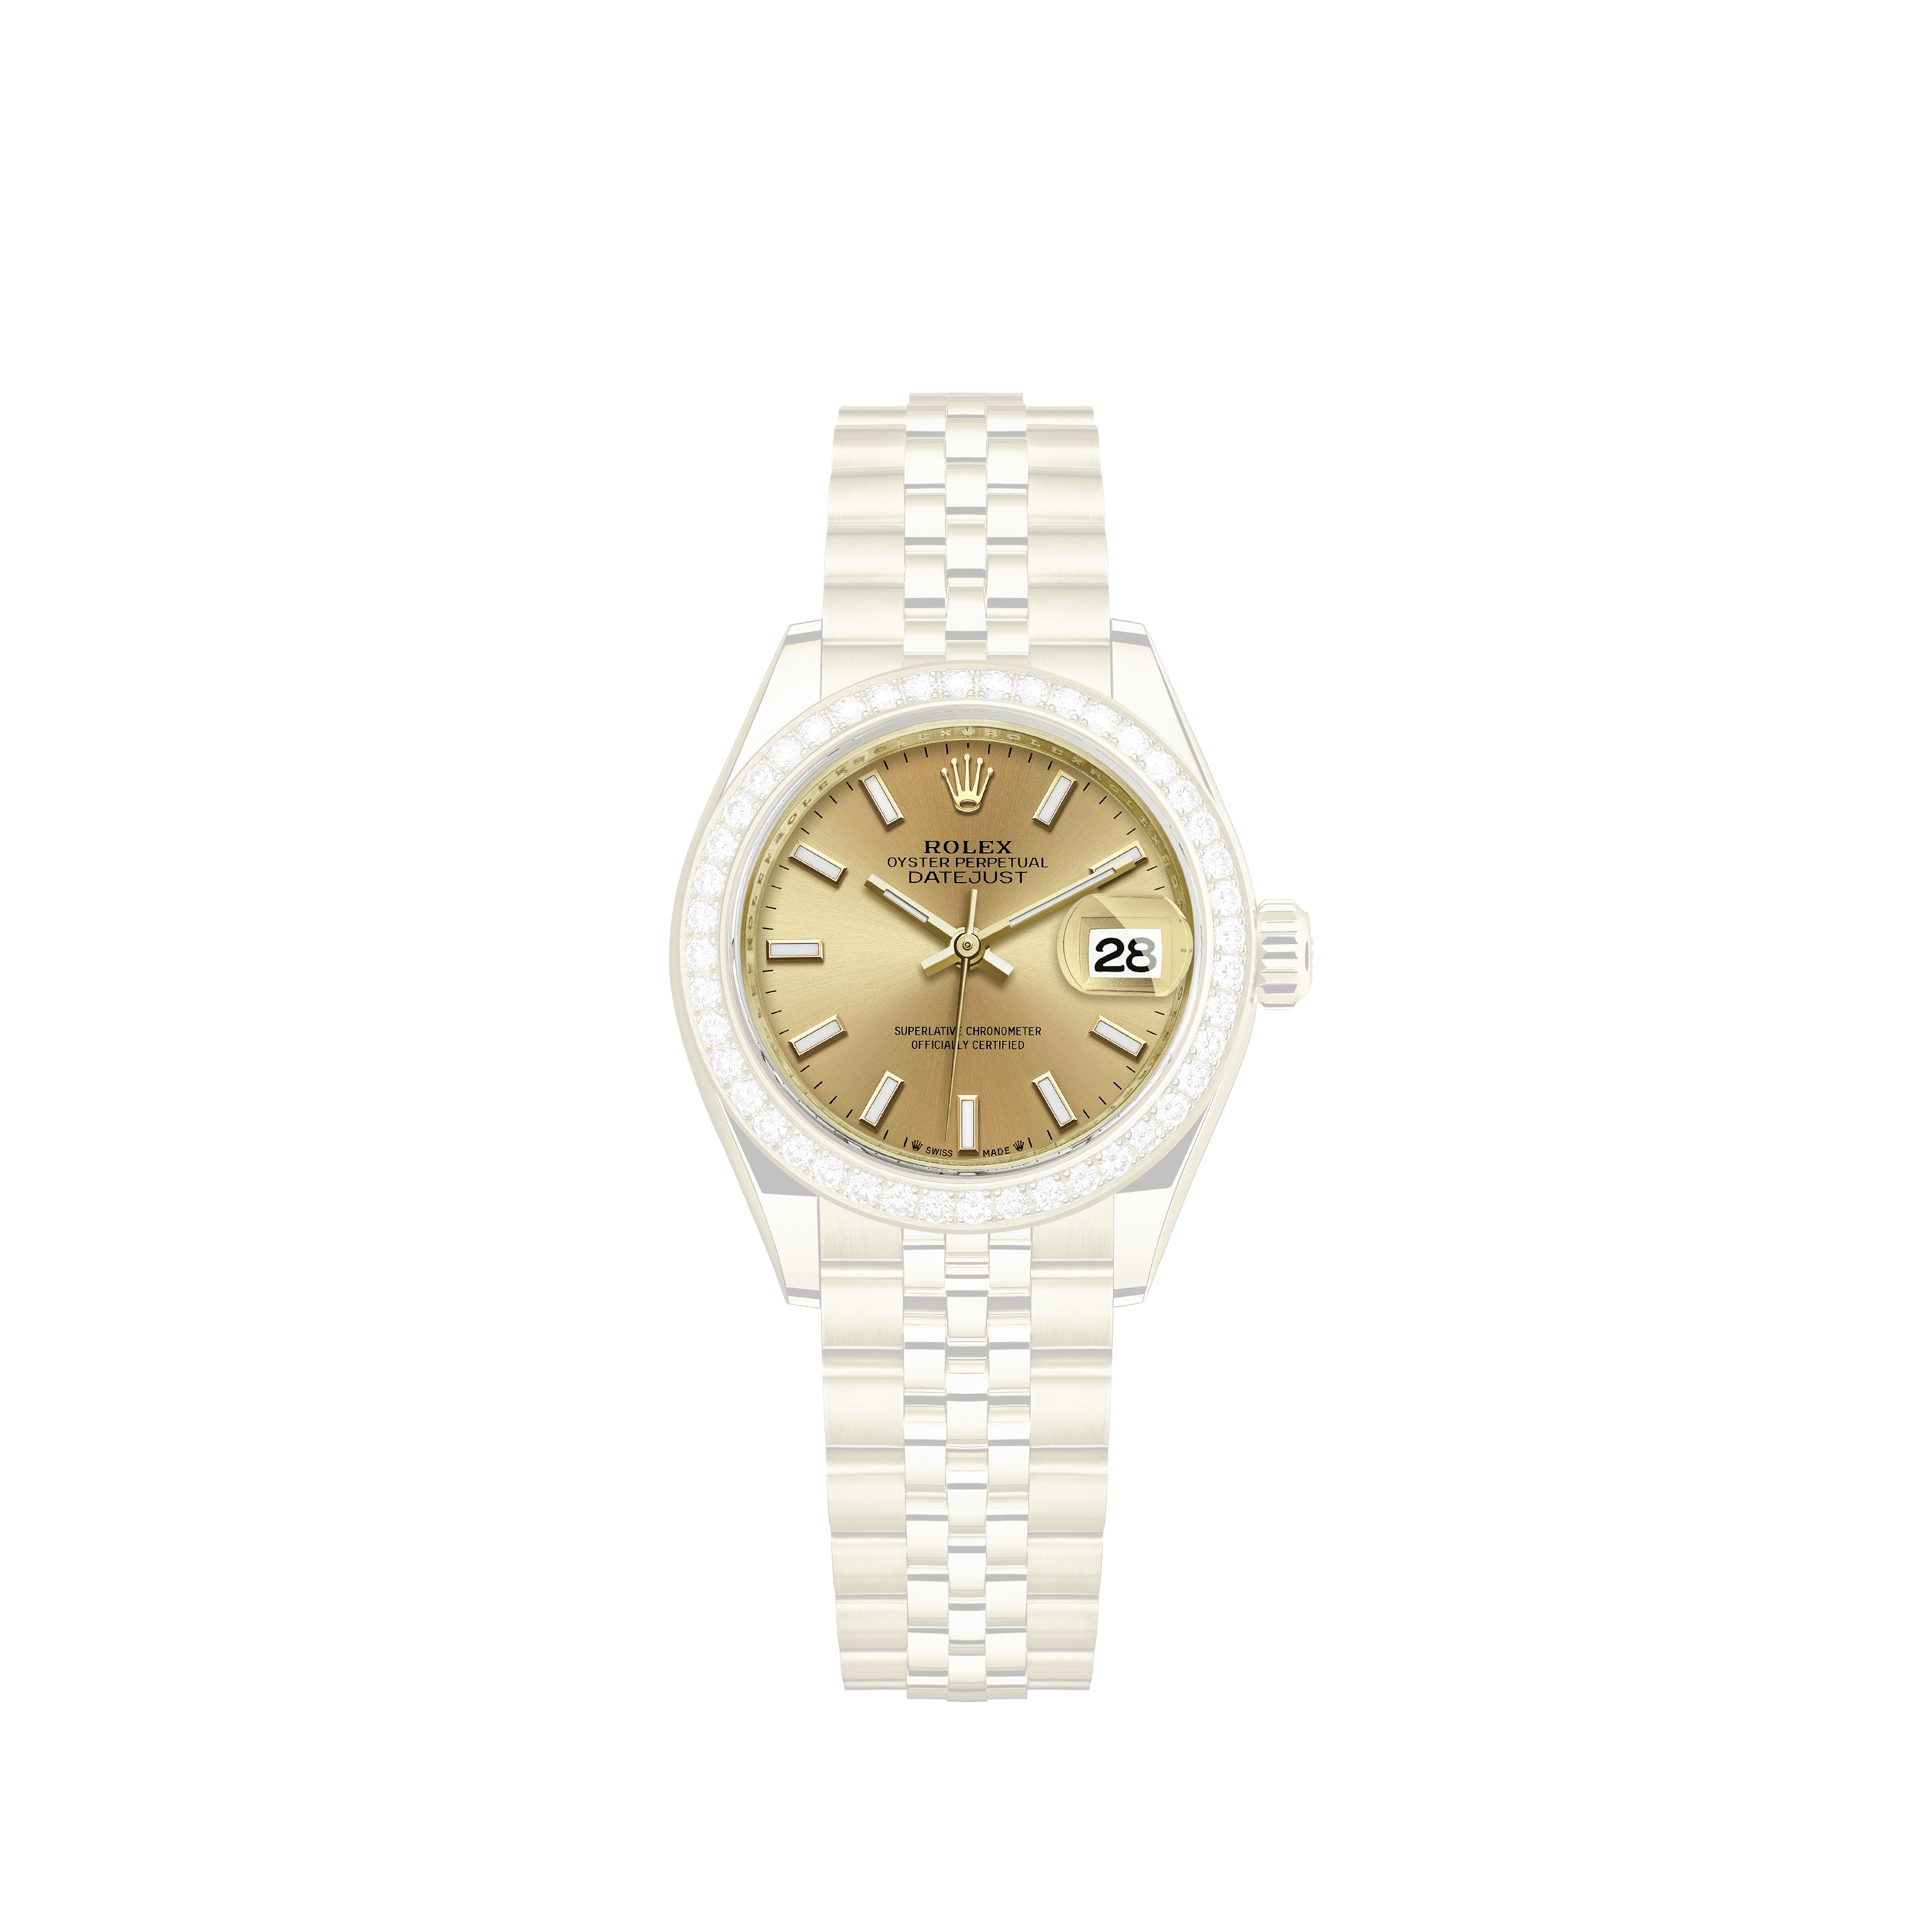 Rolex 2020 Date Just Model With Jubilee Band And 41mm DialRolex 2020 Datejust 31, 178274, Diamond Dot Dial, Fully Stickered, Box & Papers